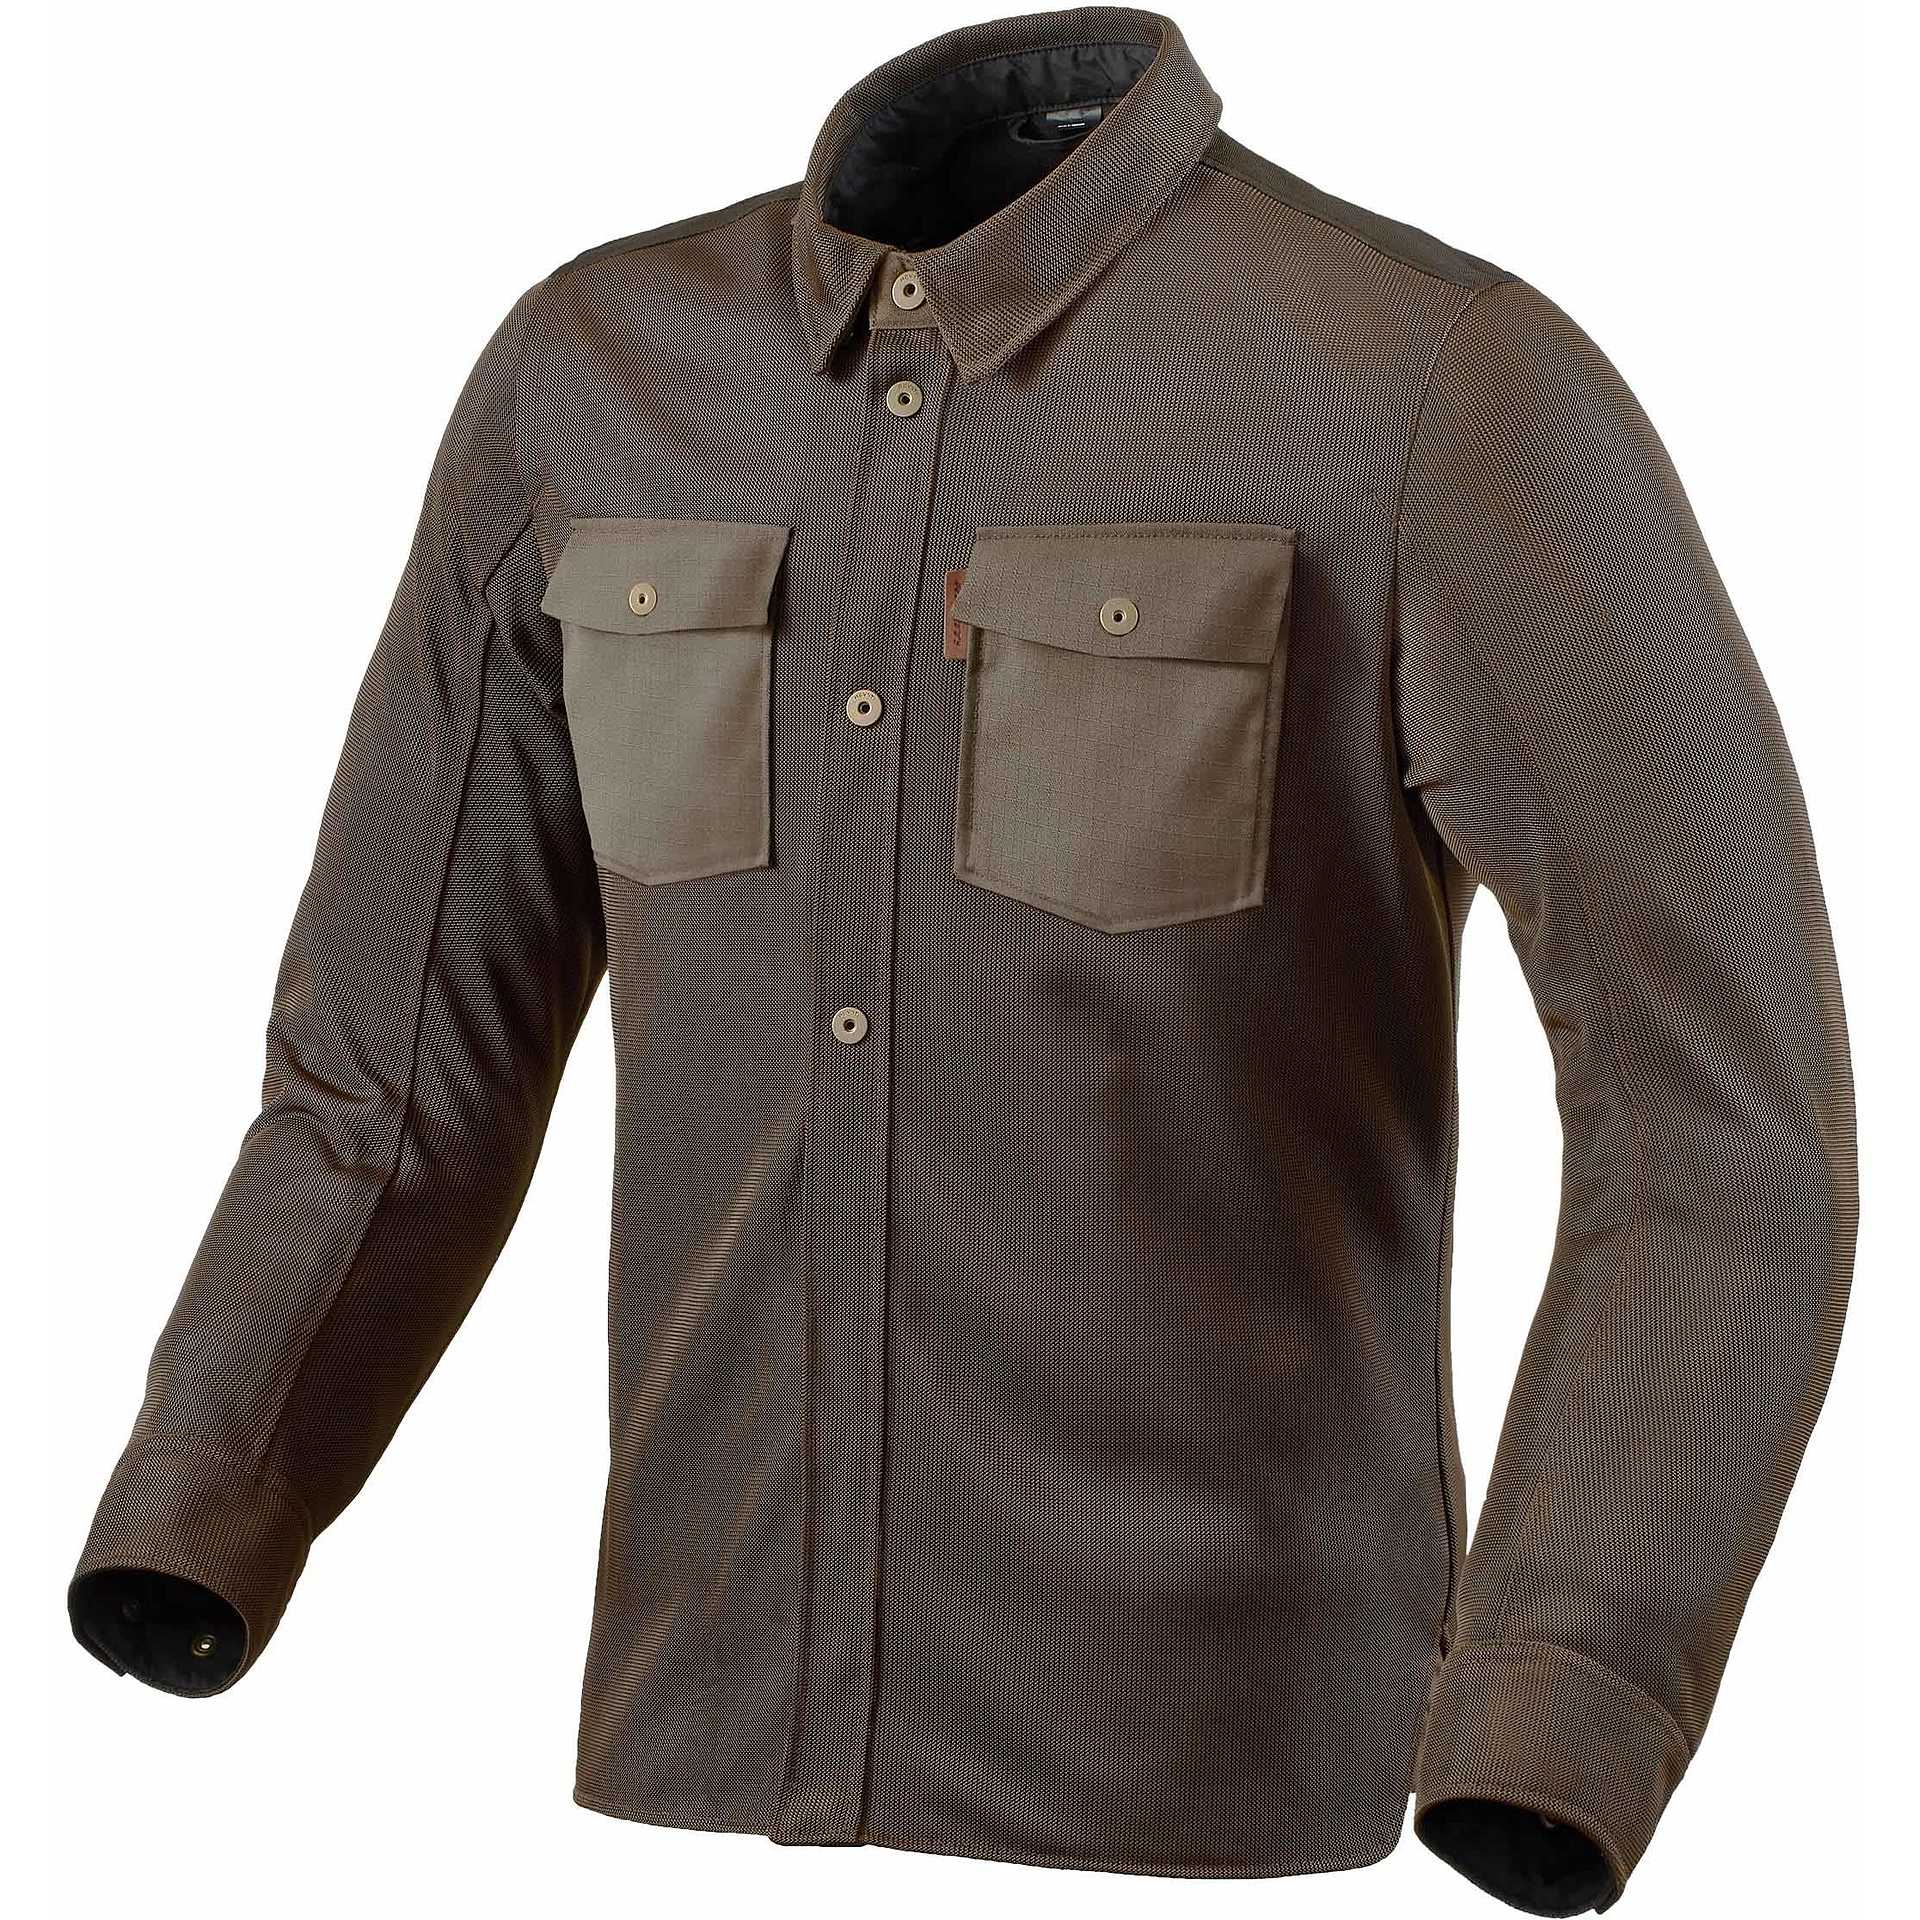 Image of REV'IT! Overshirt Tracer Air 2 Jacket Brown Size 2XL ID 8700001317139